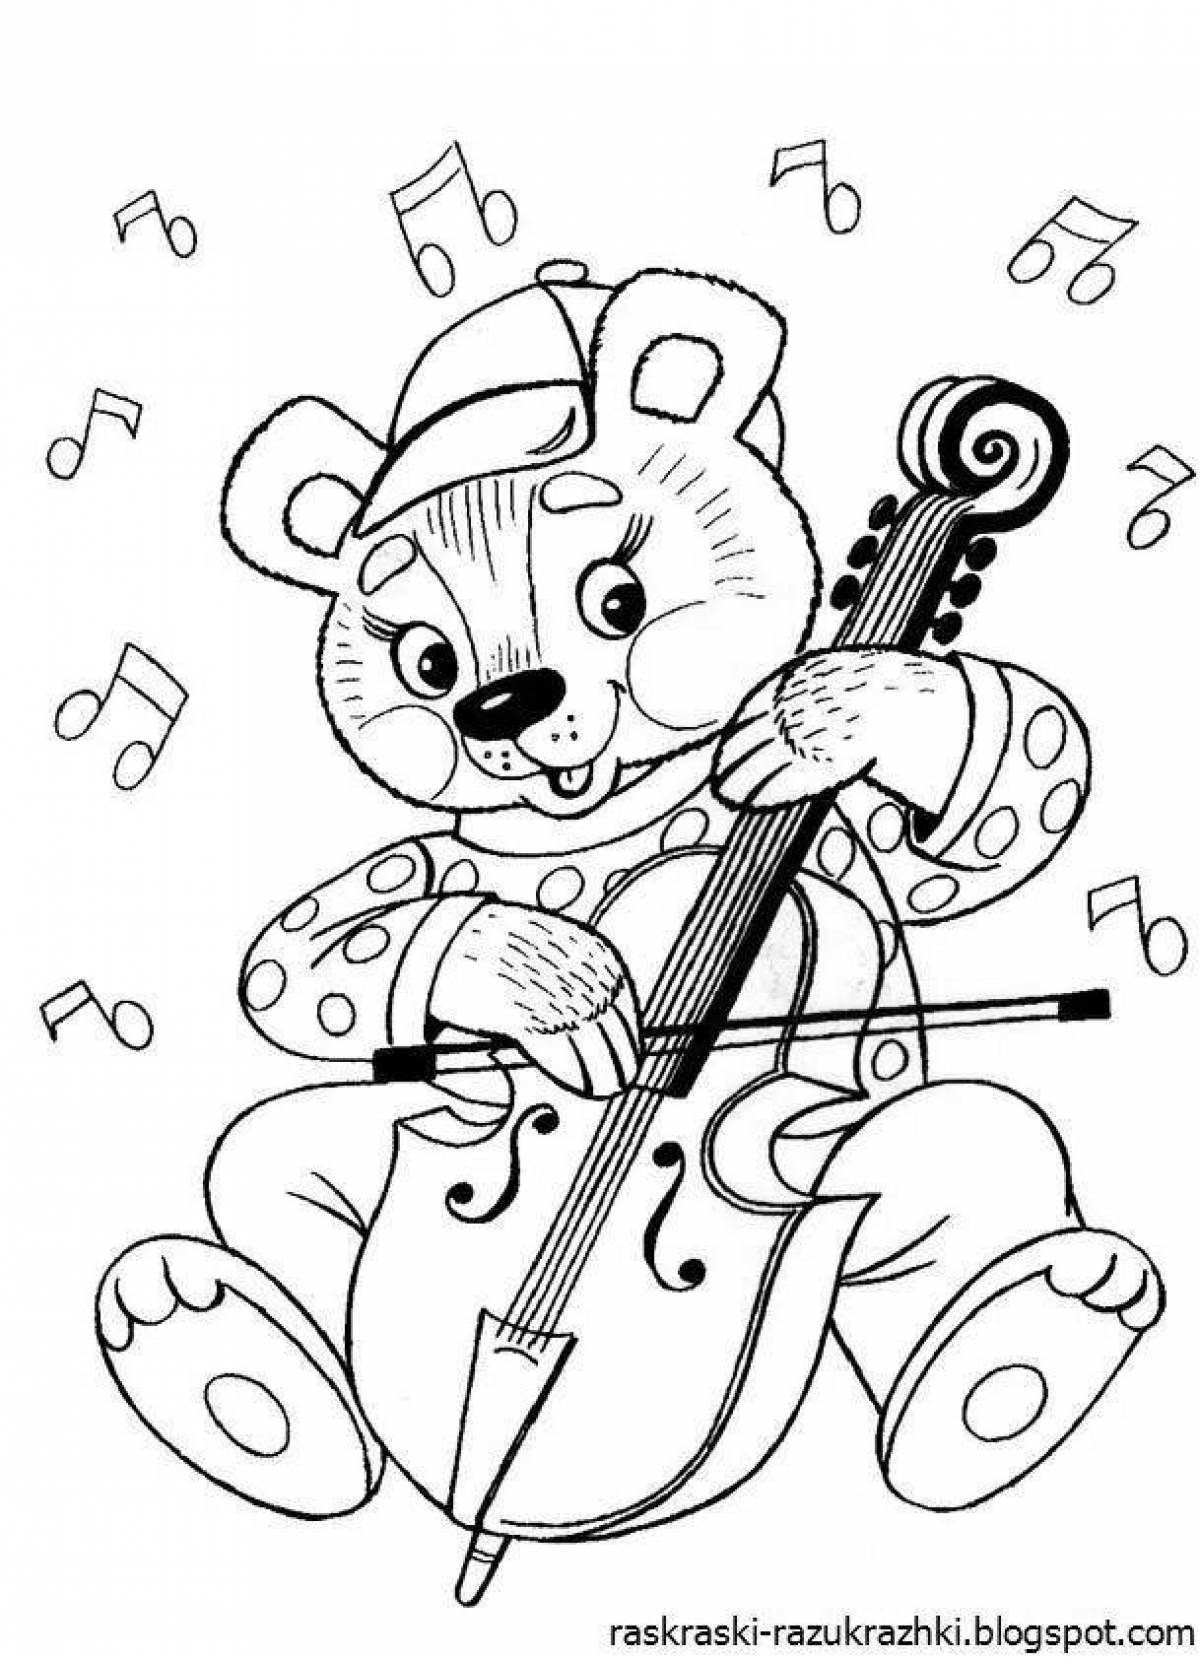 Coloring for bright musical instruments for children 6-7 years old